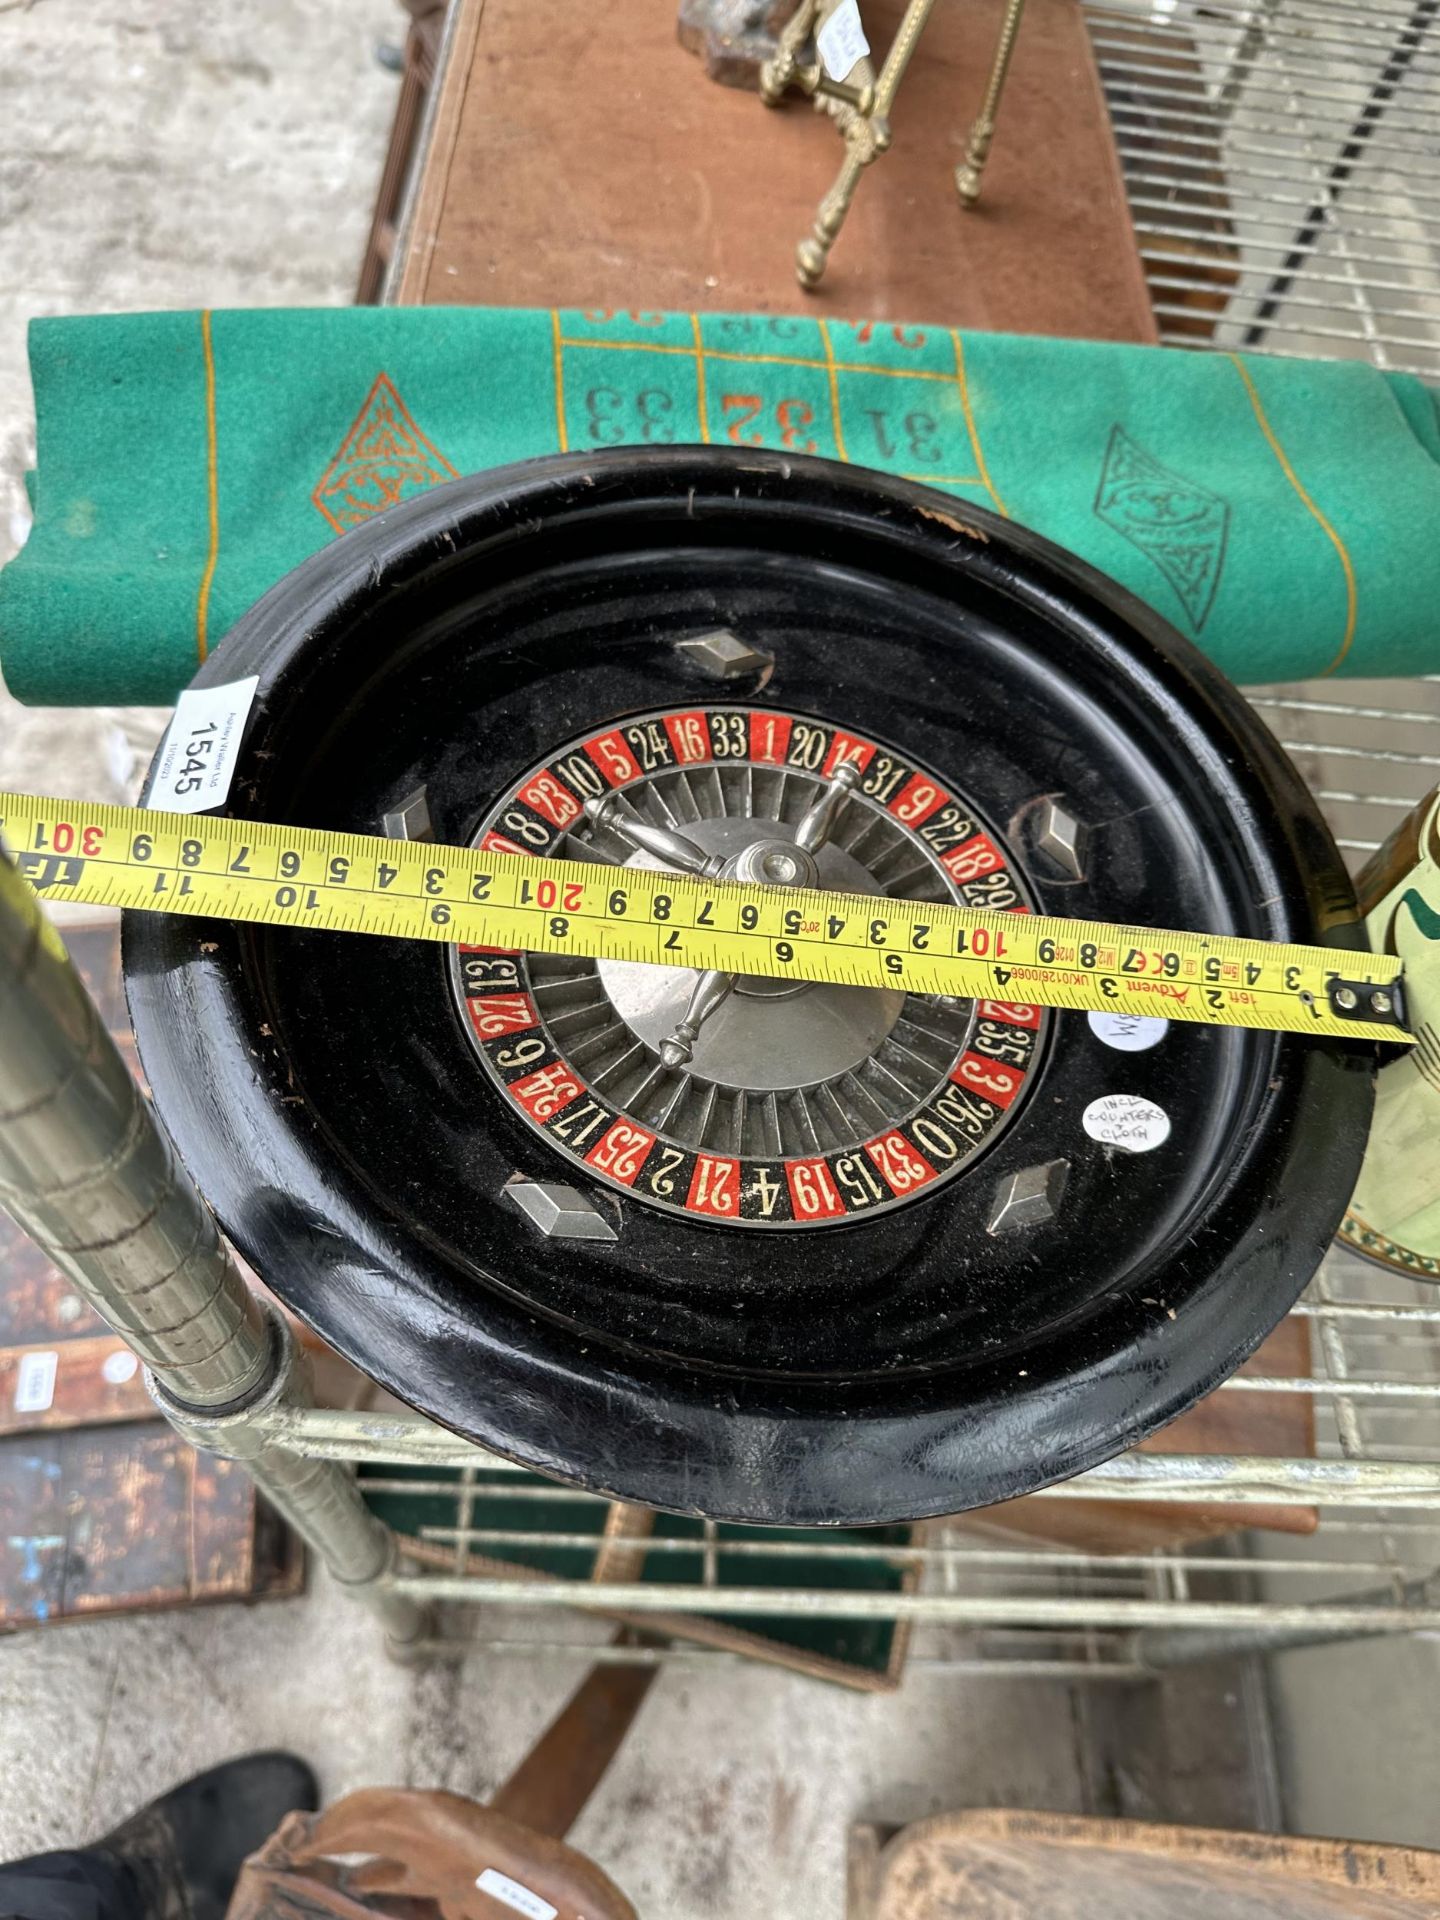 A VINTAGE ROULETTE GAME CONSISTING OF A WHEEL, COUNTERS AND CLOTH ETC - Image 3 of 3